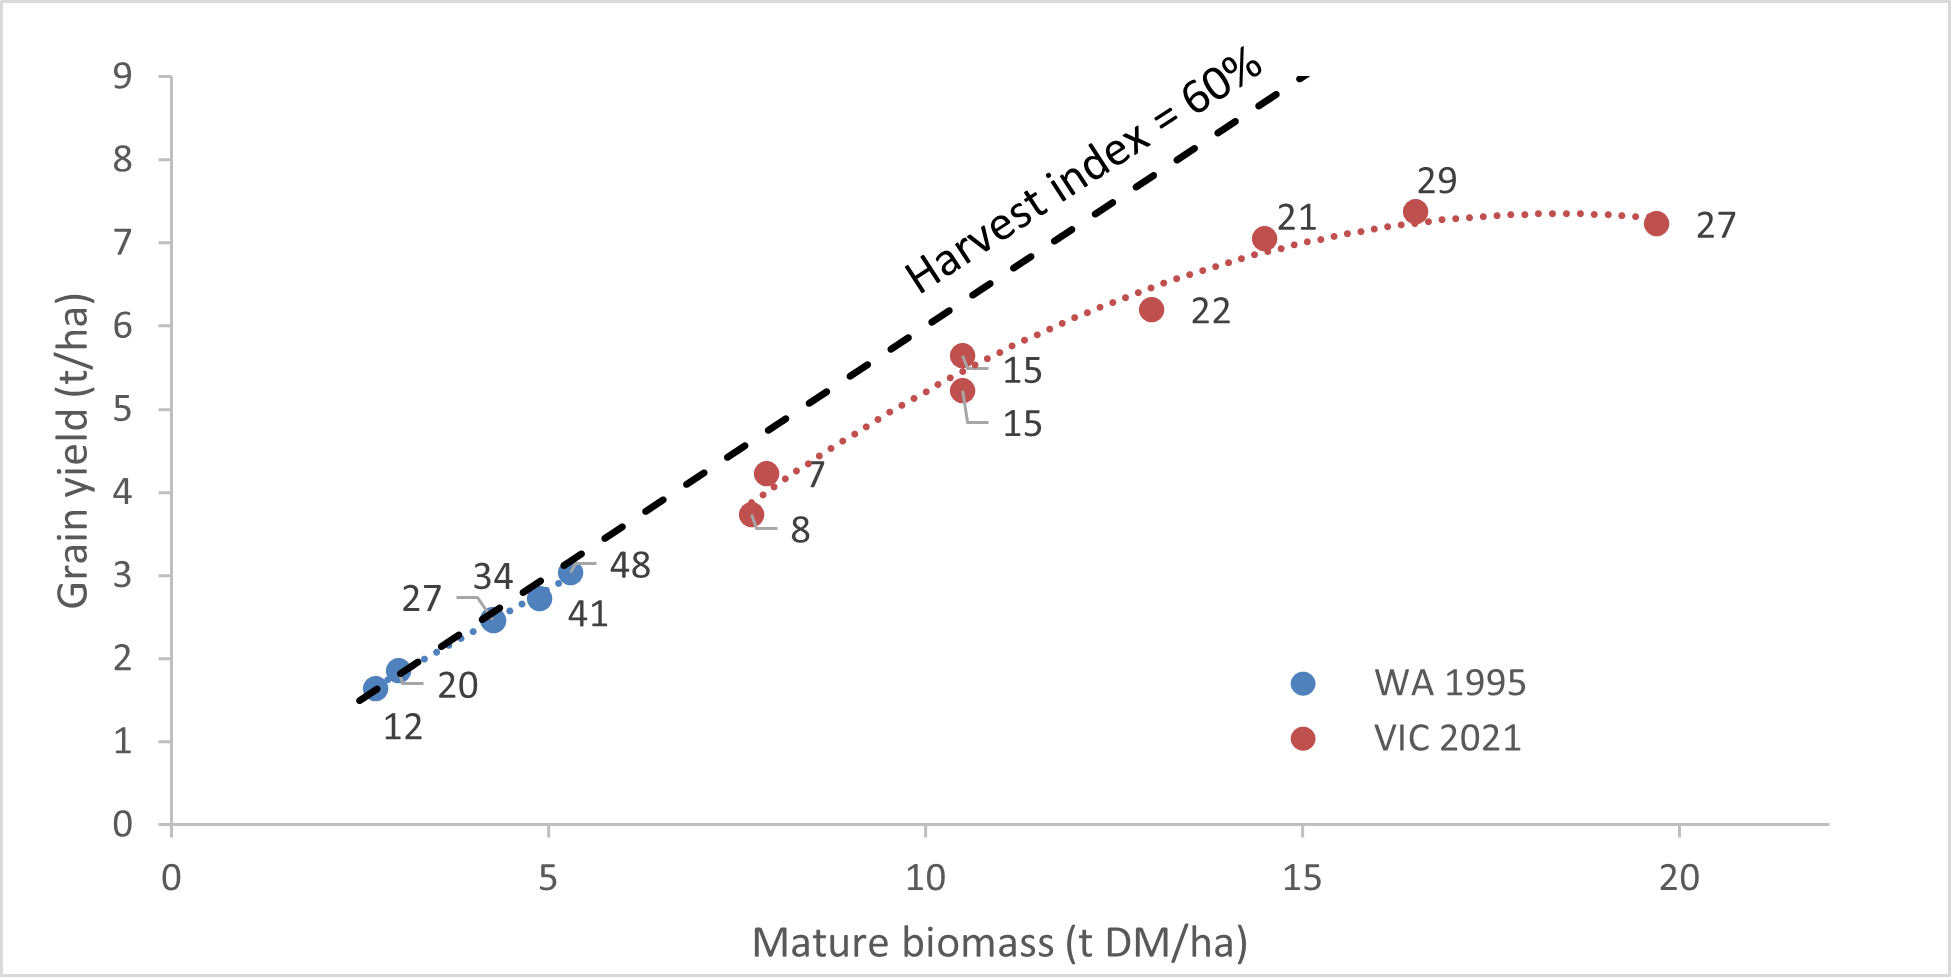 The relationship between grain yield and total above ground biomass at maturity in two experiments with plant density treatments. The data are labelled with the established plant density (plants/m2) and the dashed line represents a harvest index (the ratio of grain biomass to total mature biomass) of 60%.